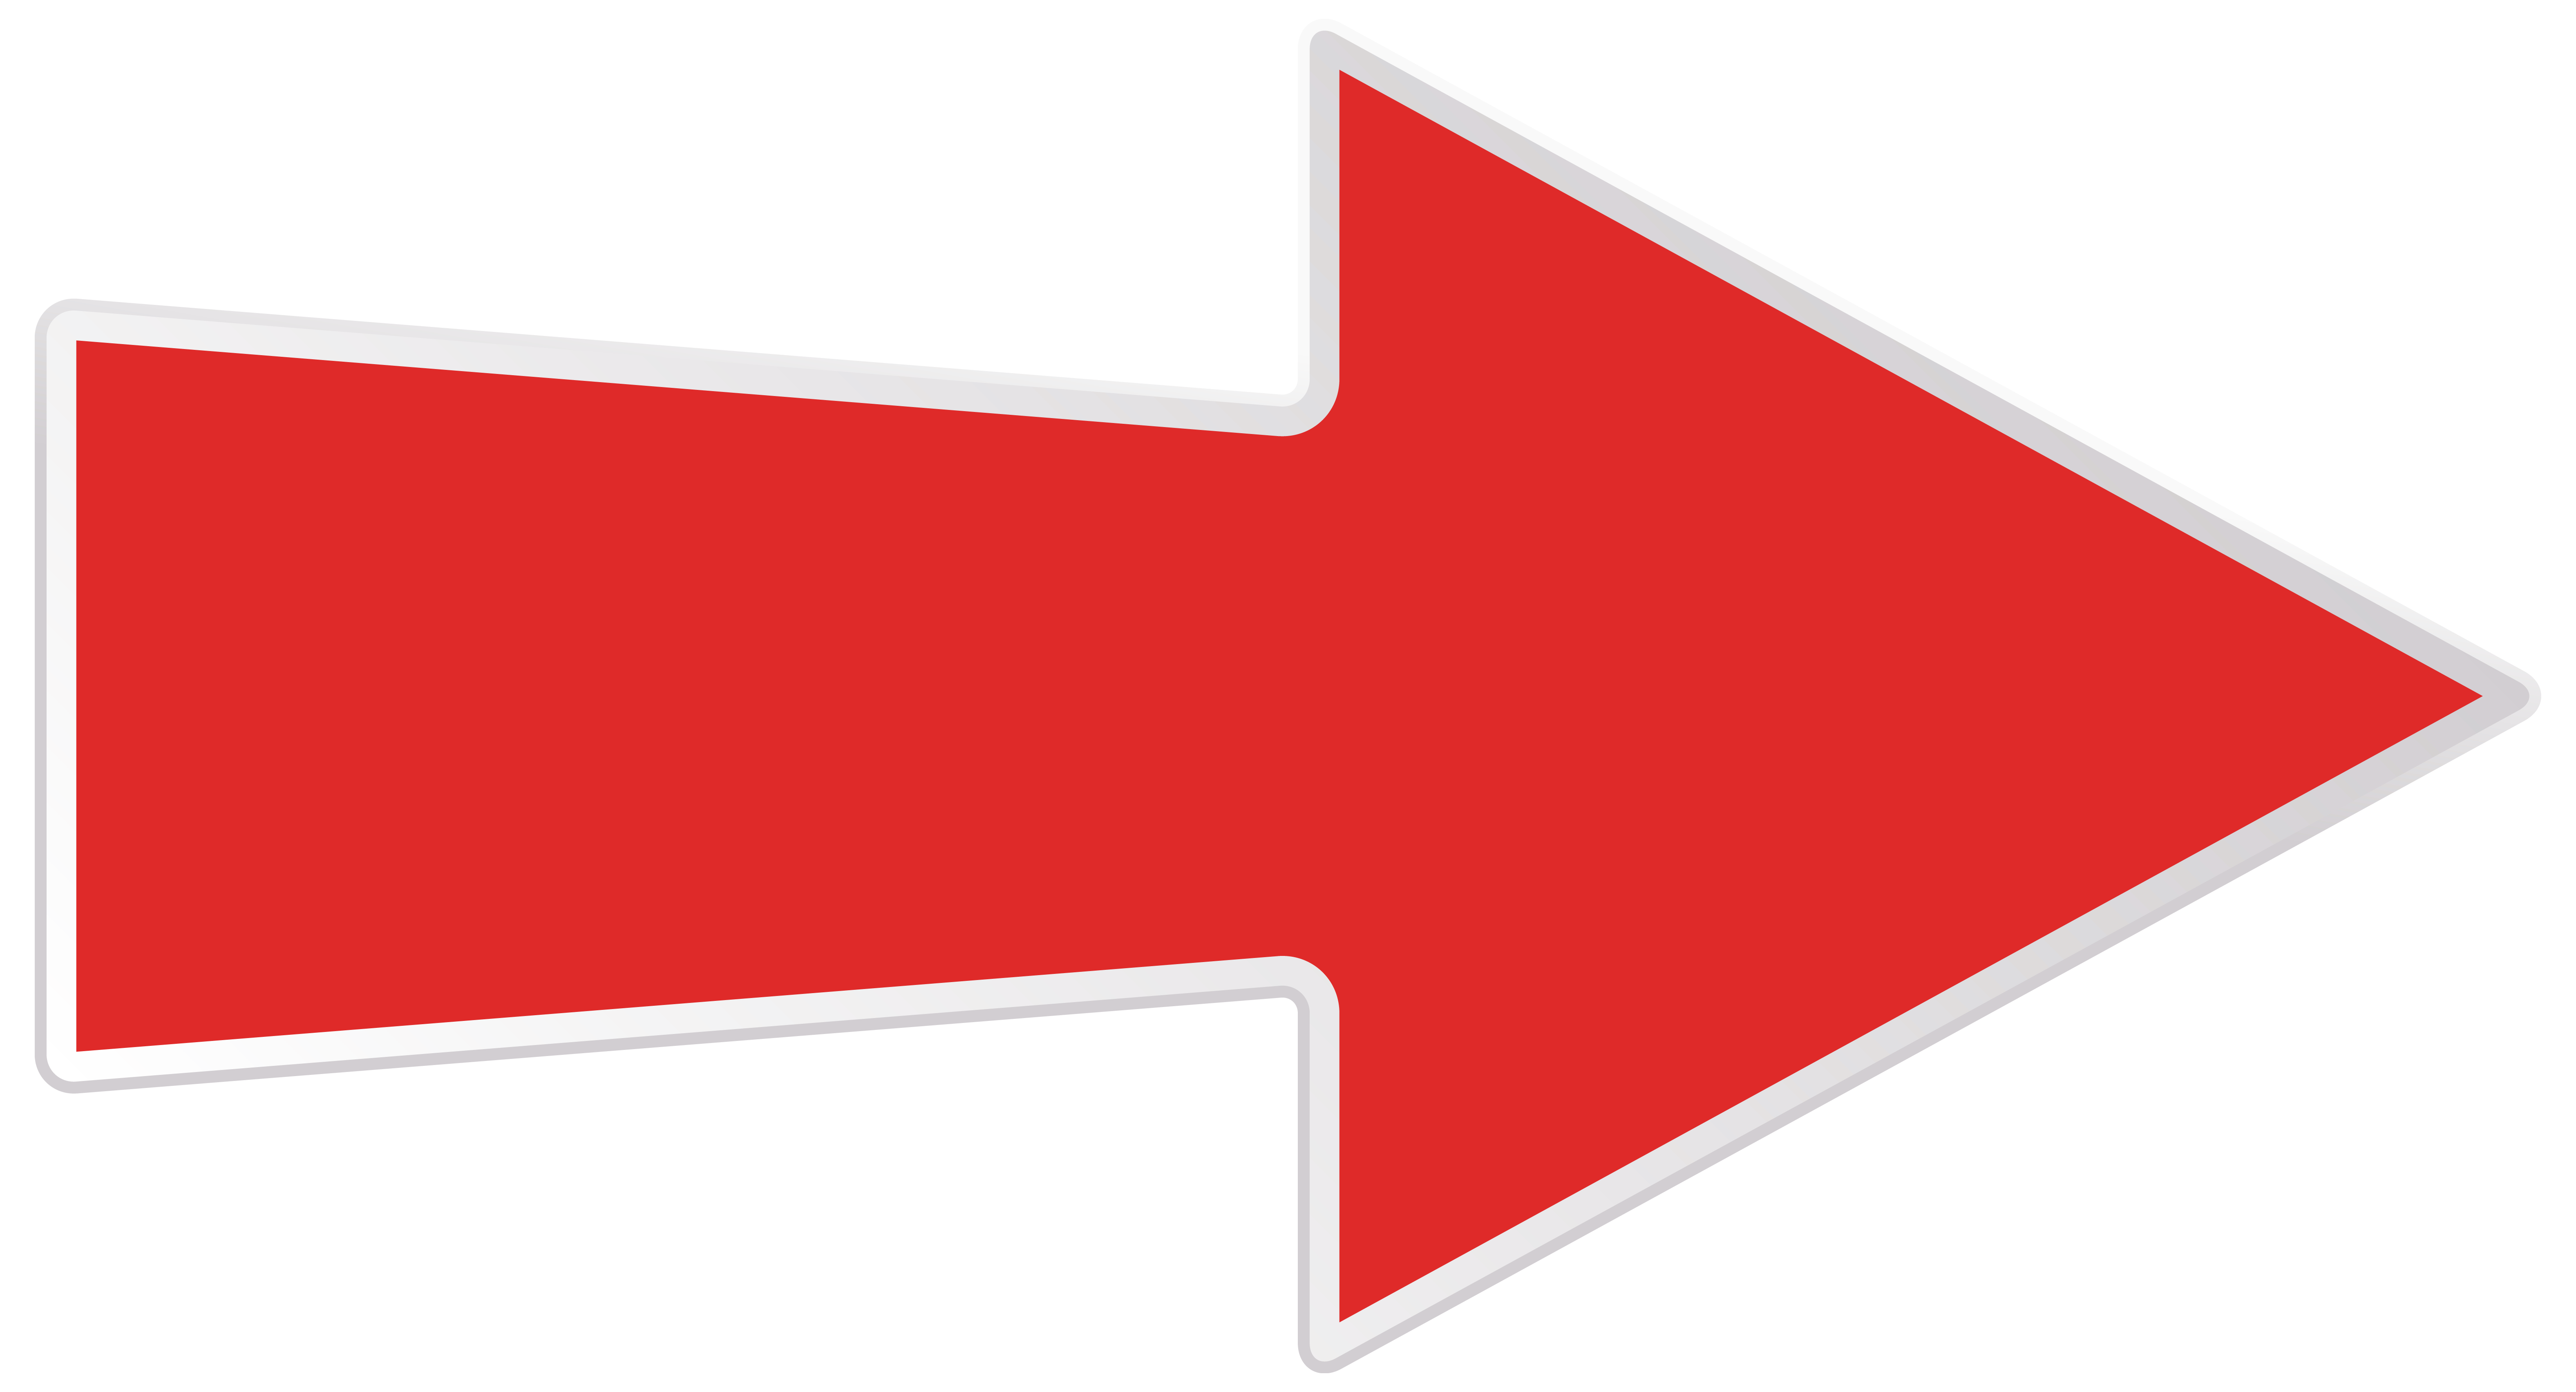 red arrow right curved